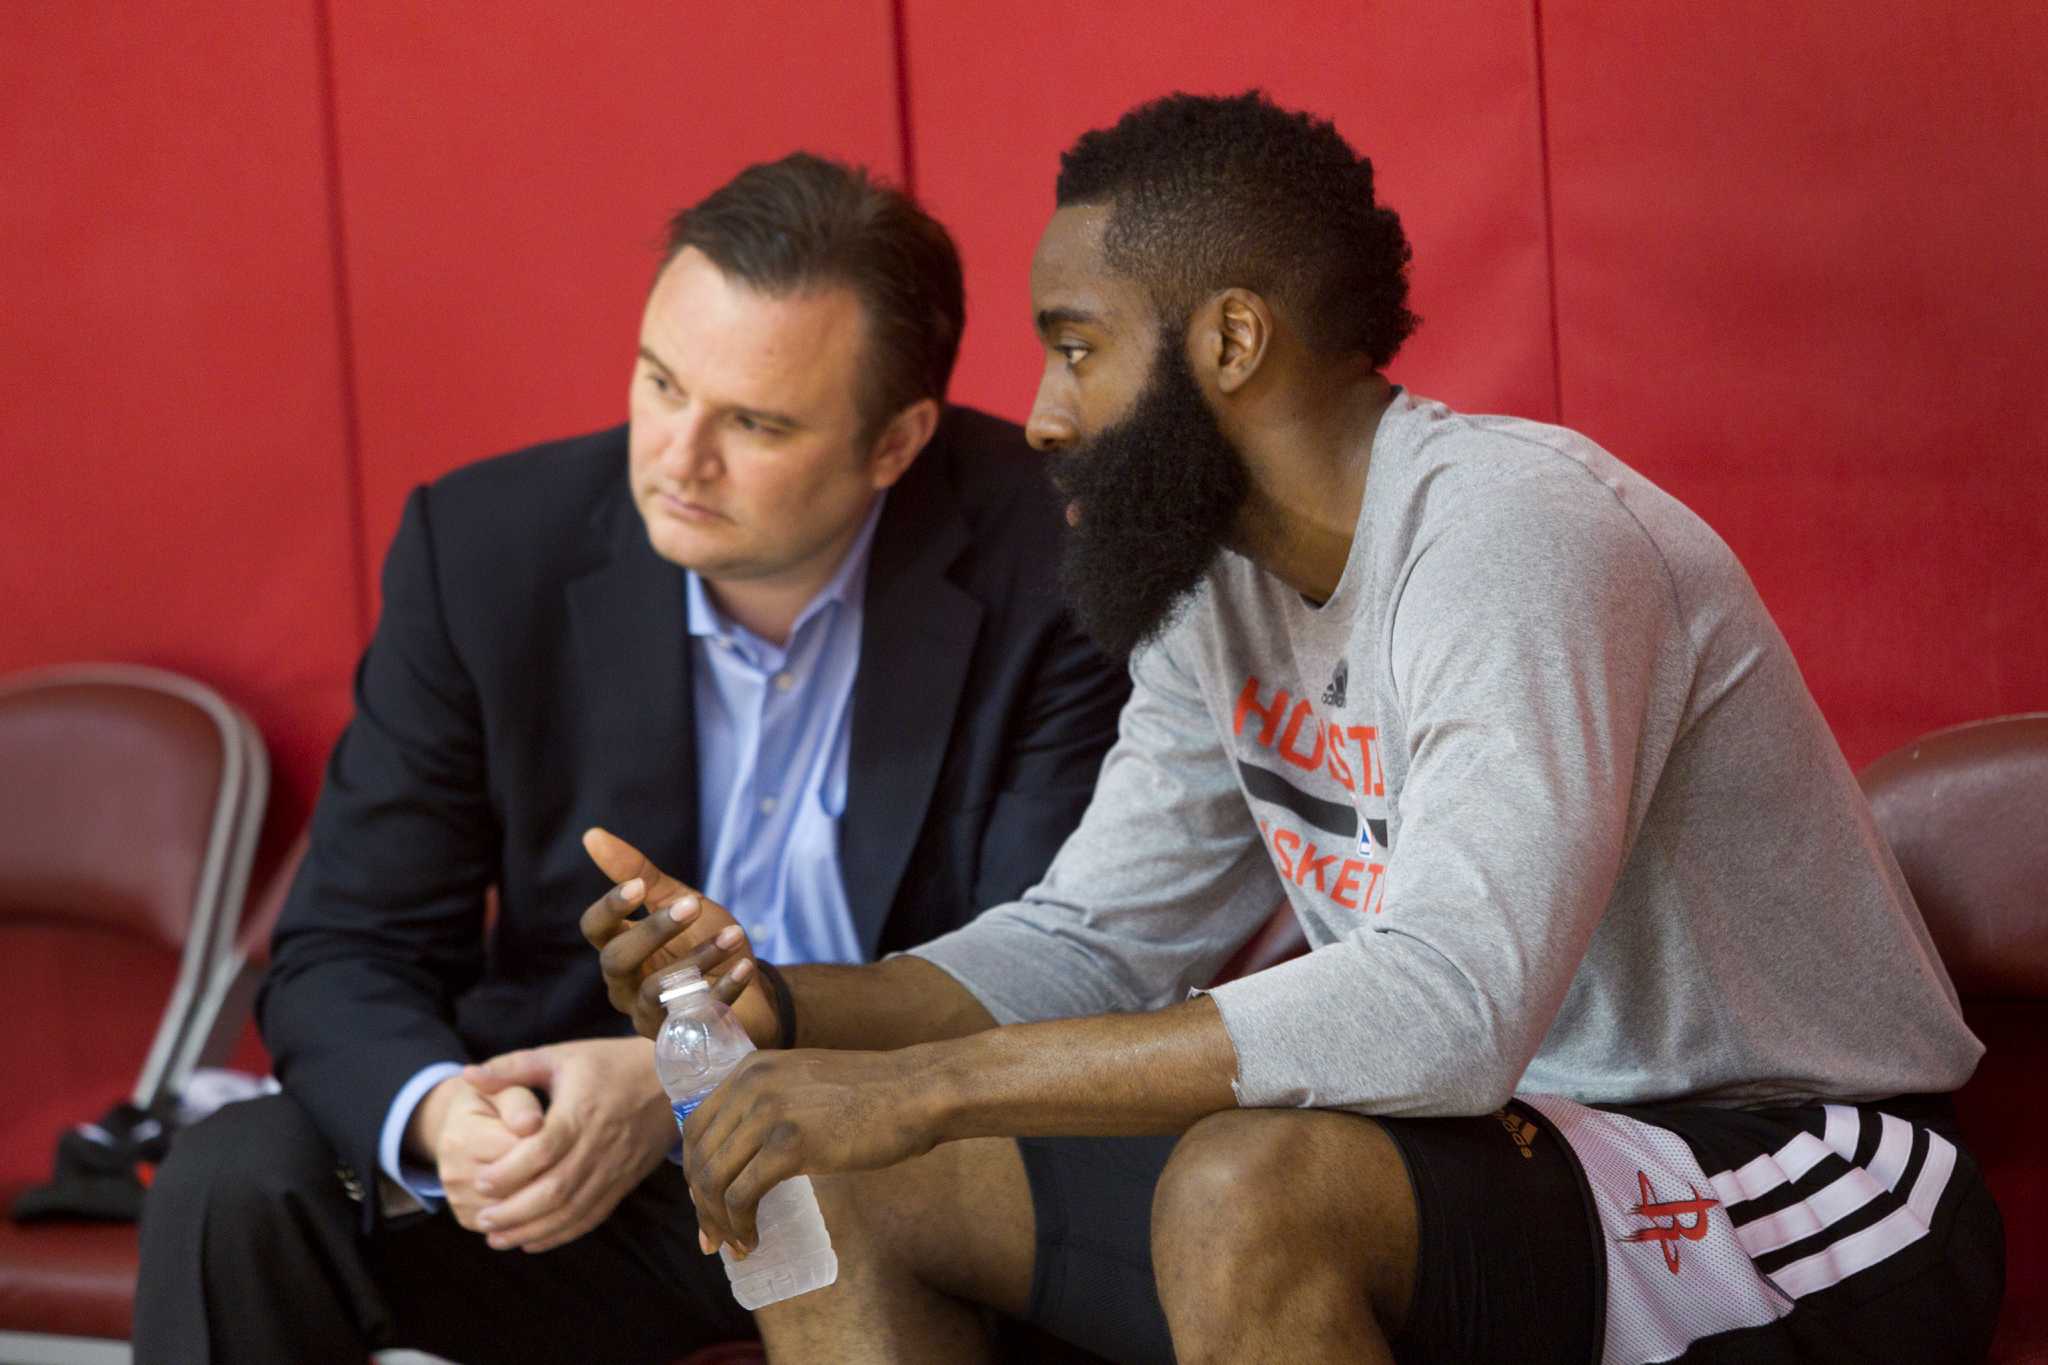 The tweet about James Harden that cost Daryl Morey $50,000